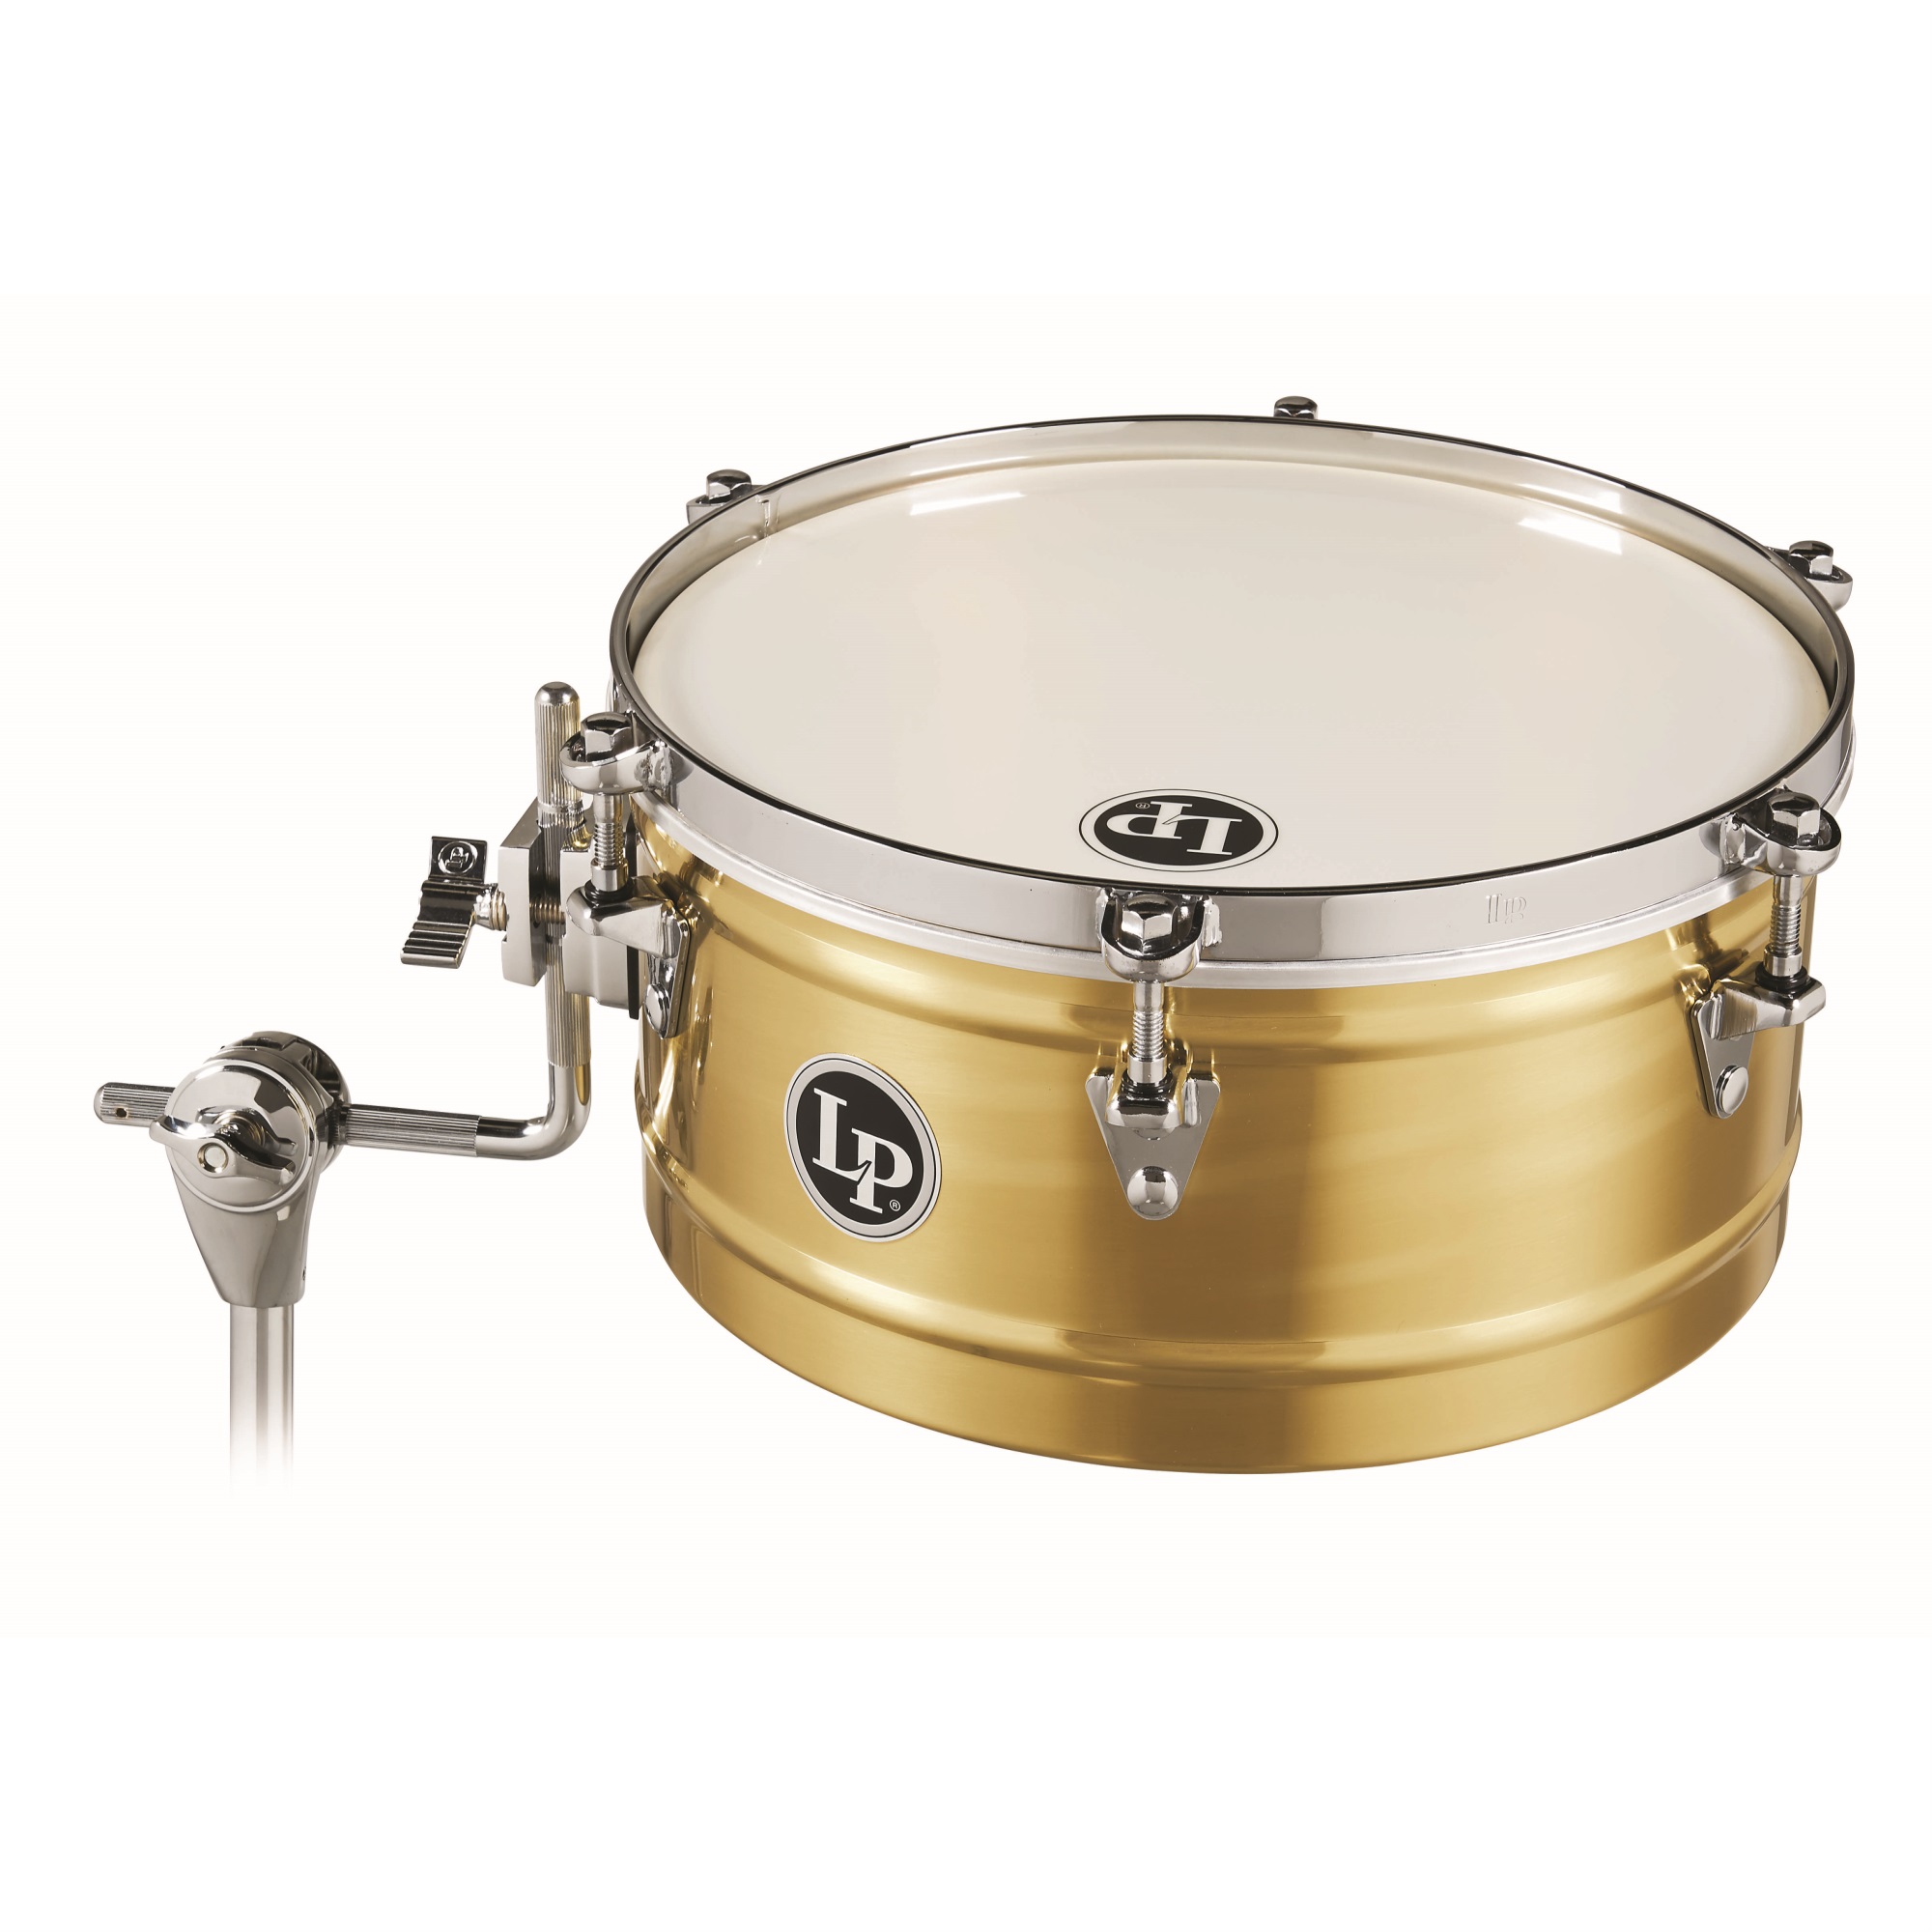 Fisher-Price 13" Brass Timbale with Chrome Hardware and Mount Bracket